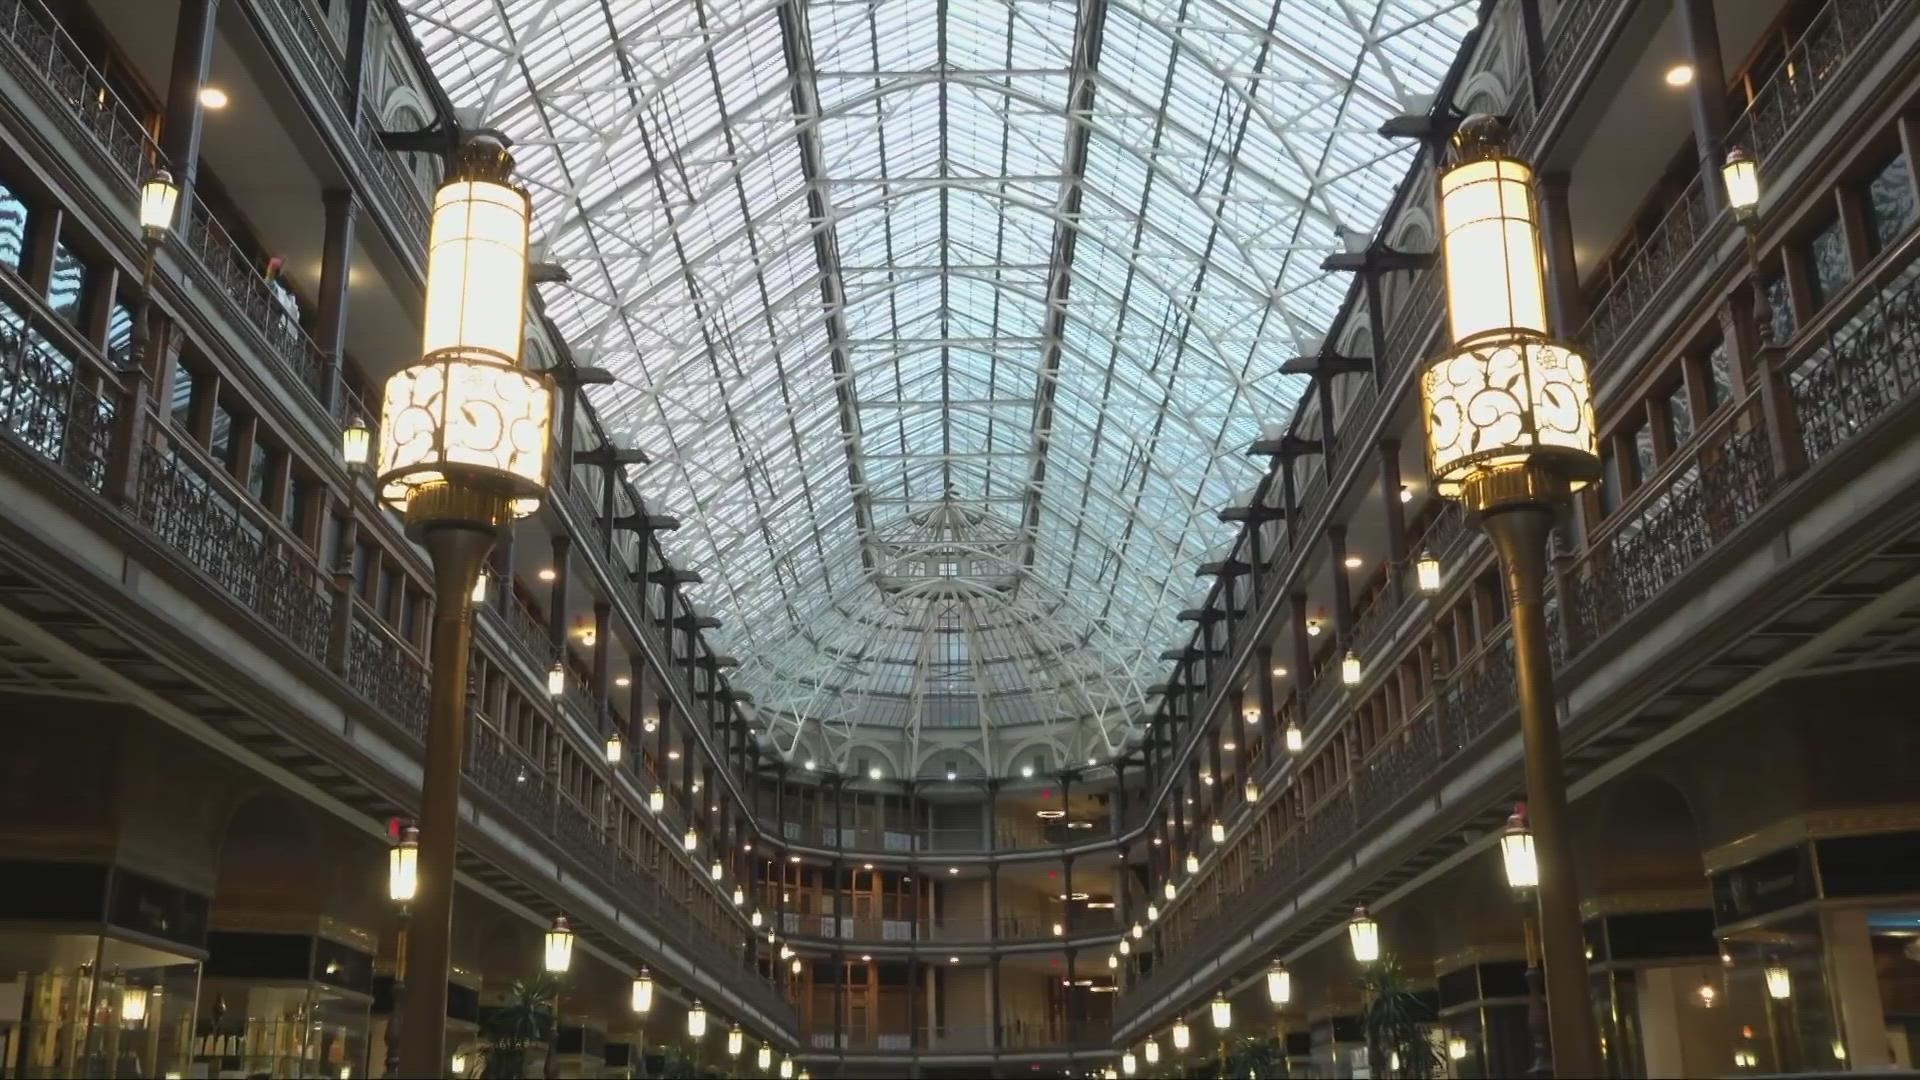 Designed in the 1800s as an indoor shopping area, the Arcade, located in downtown Cleveland, is still home to businesses, and now a hotel, over 100 years later.